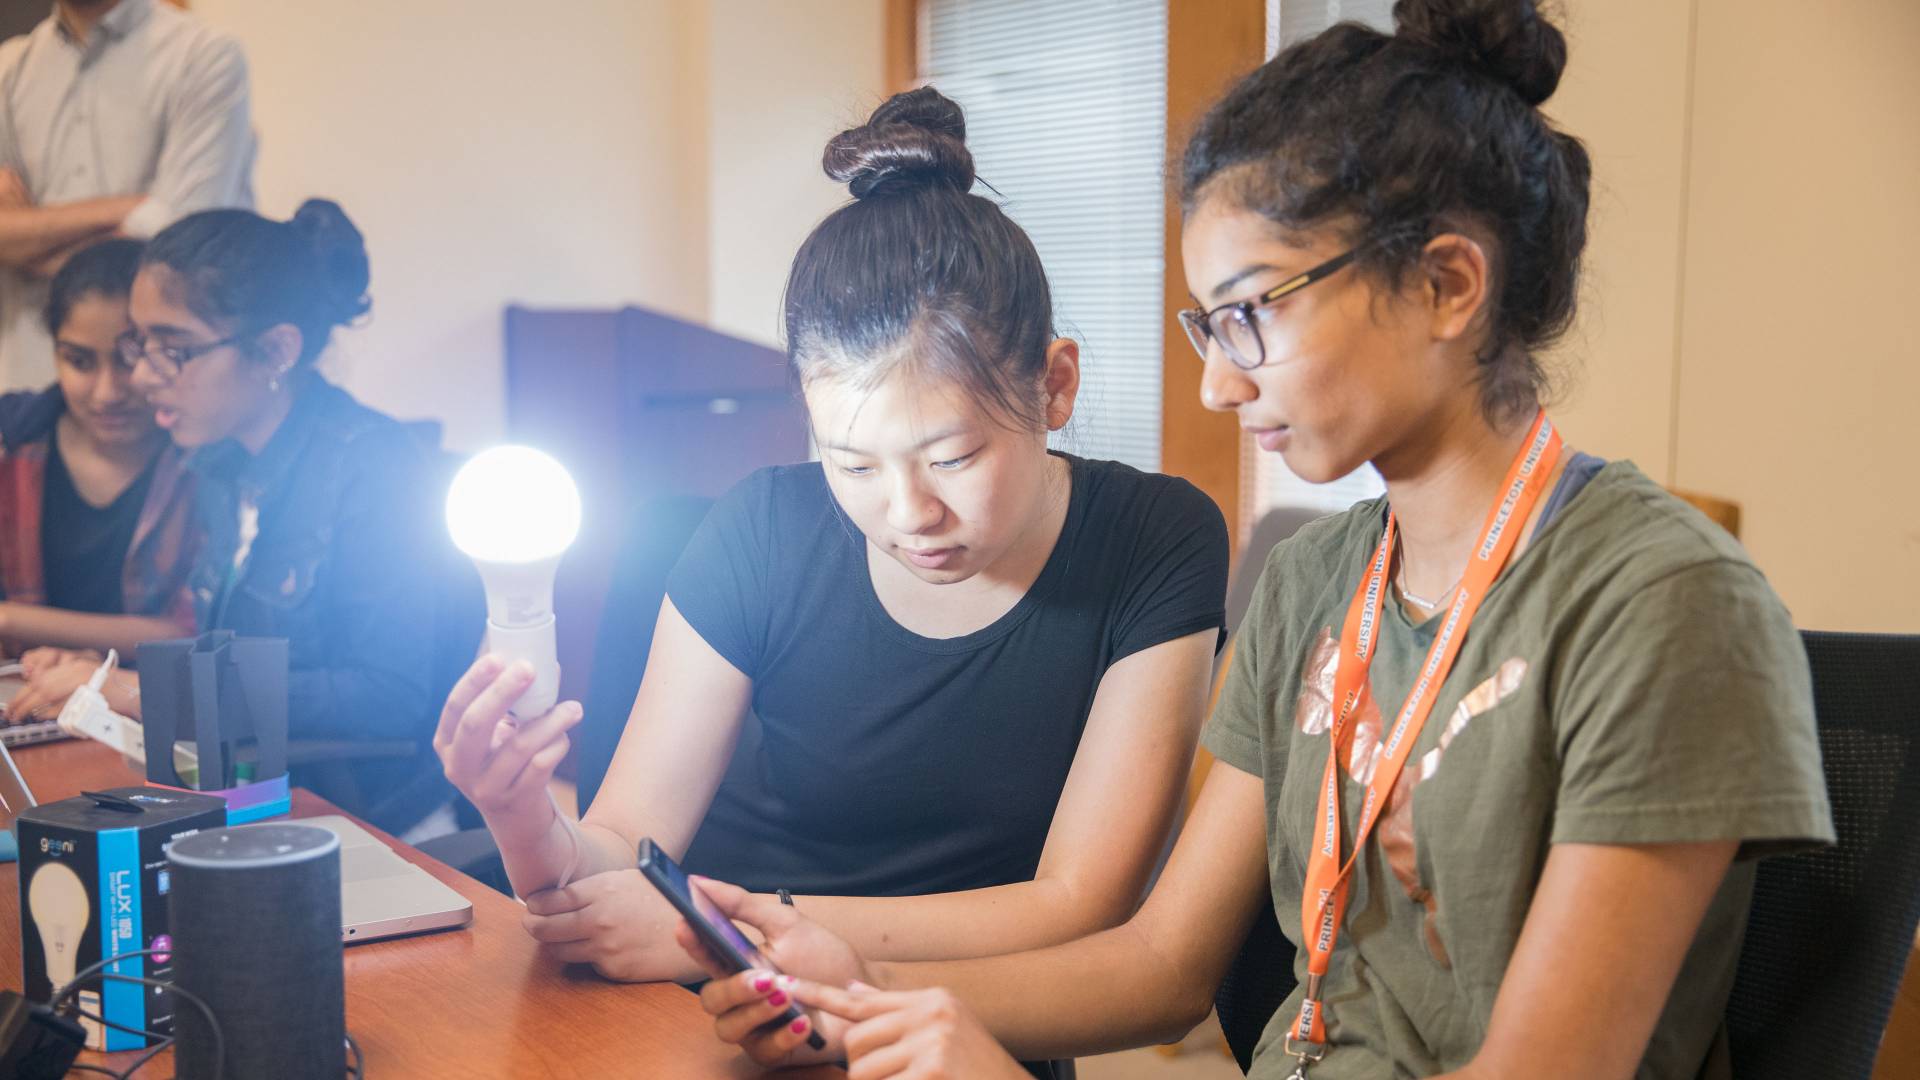 Students holding lit lightbulb while looking at cell phone